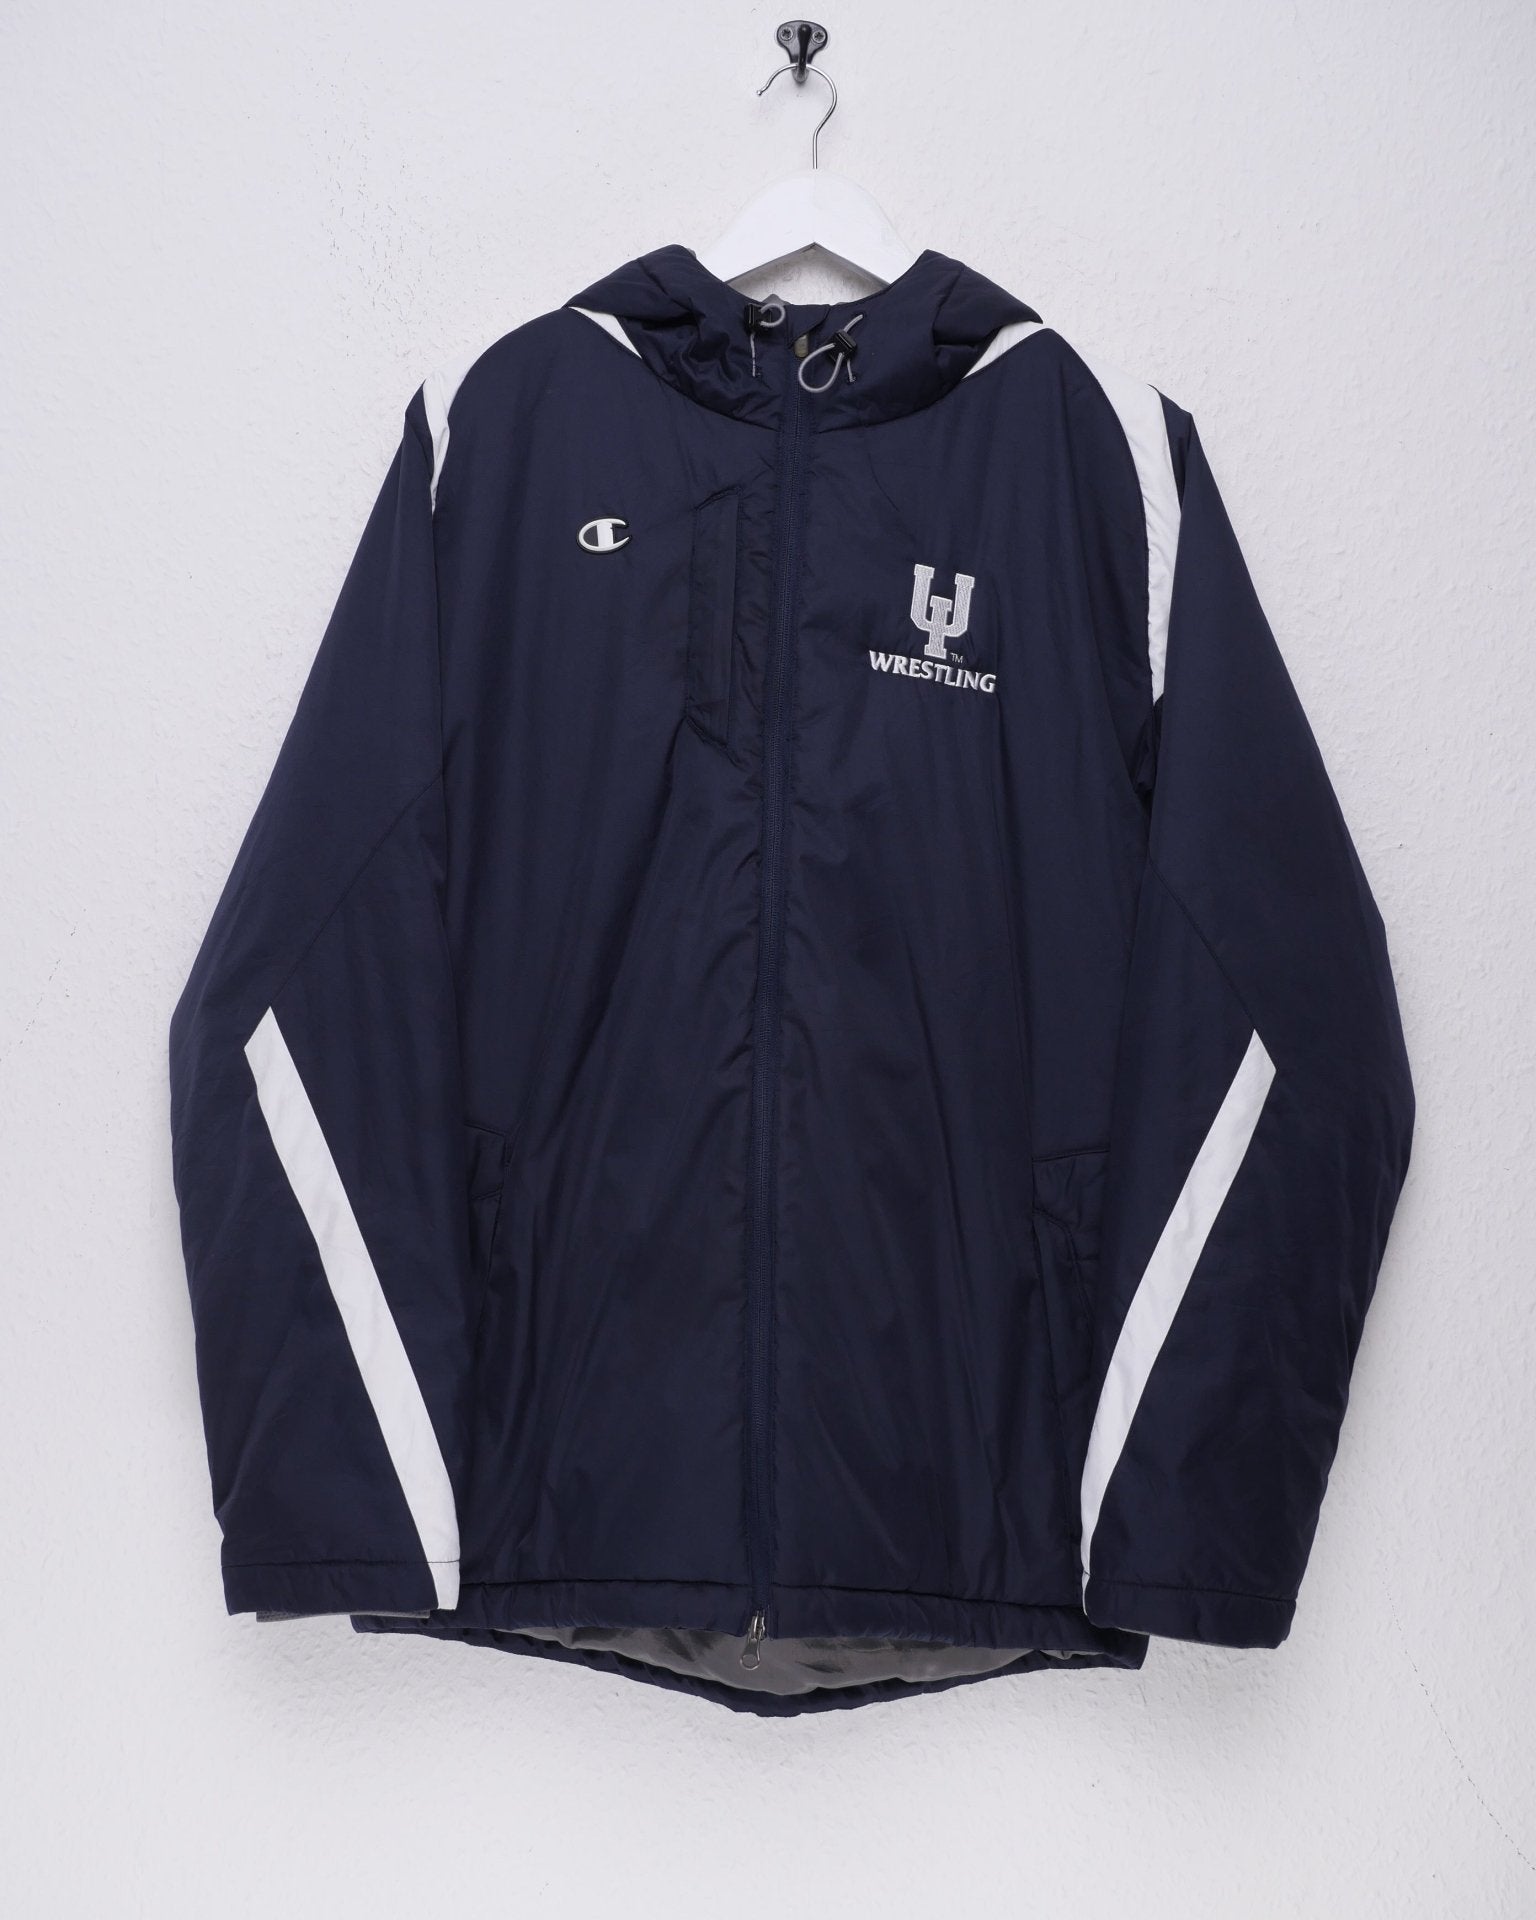 Champion Gum Logo 'Wrestling' embroidered navy thick Track Jacket - Peeces